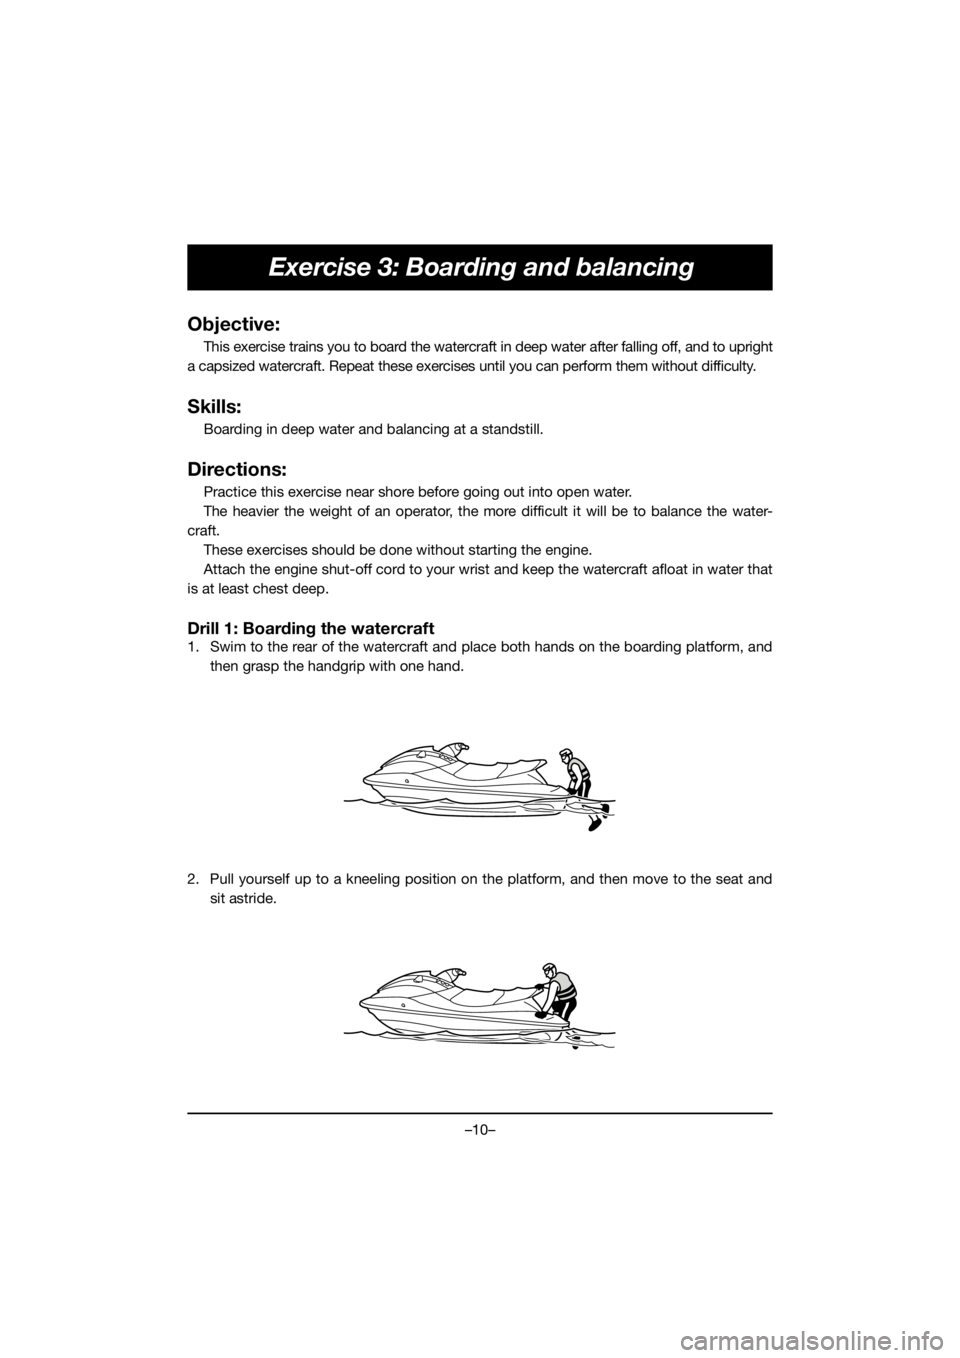 YAMAHA EX 2020  Bruksanvisningar (in Swedish) –10–
Exercise 3: Boarding and balancing
Objective:
This exercise trains you to board the watercraft in deep water after falling off, and to upright
a capsized watercraft. Repeat these exercises un